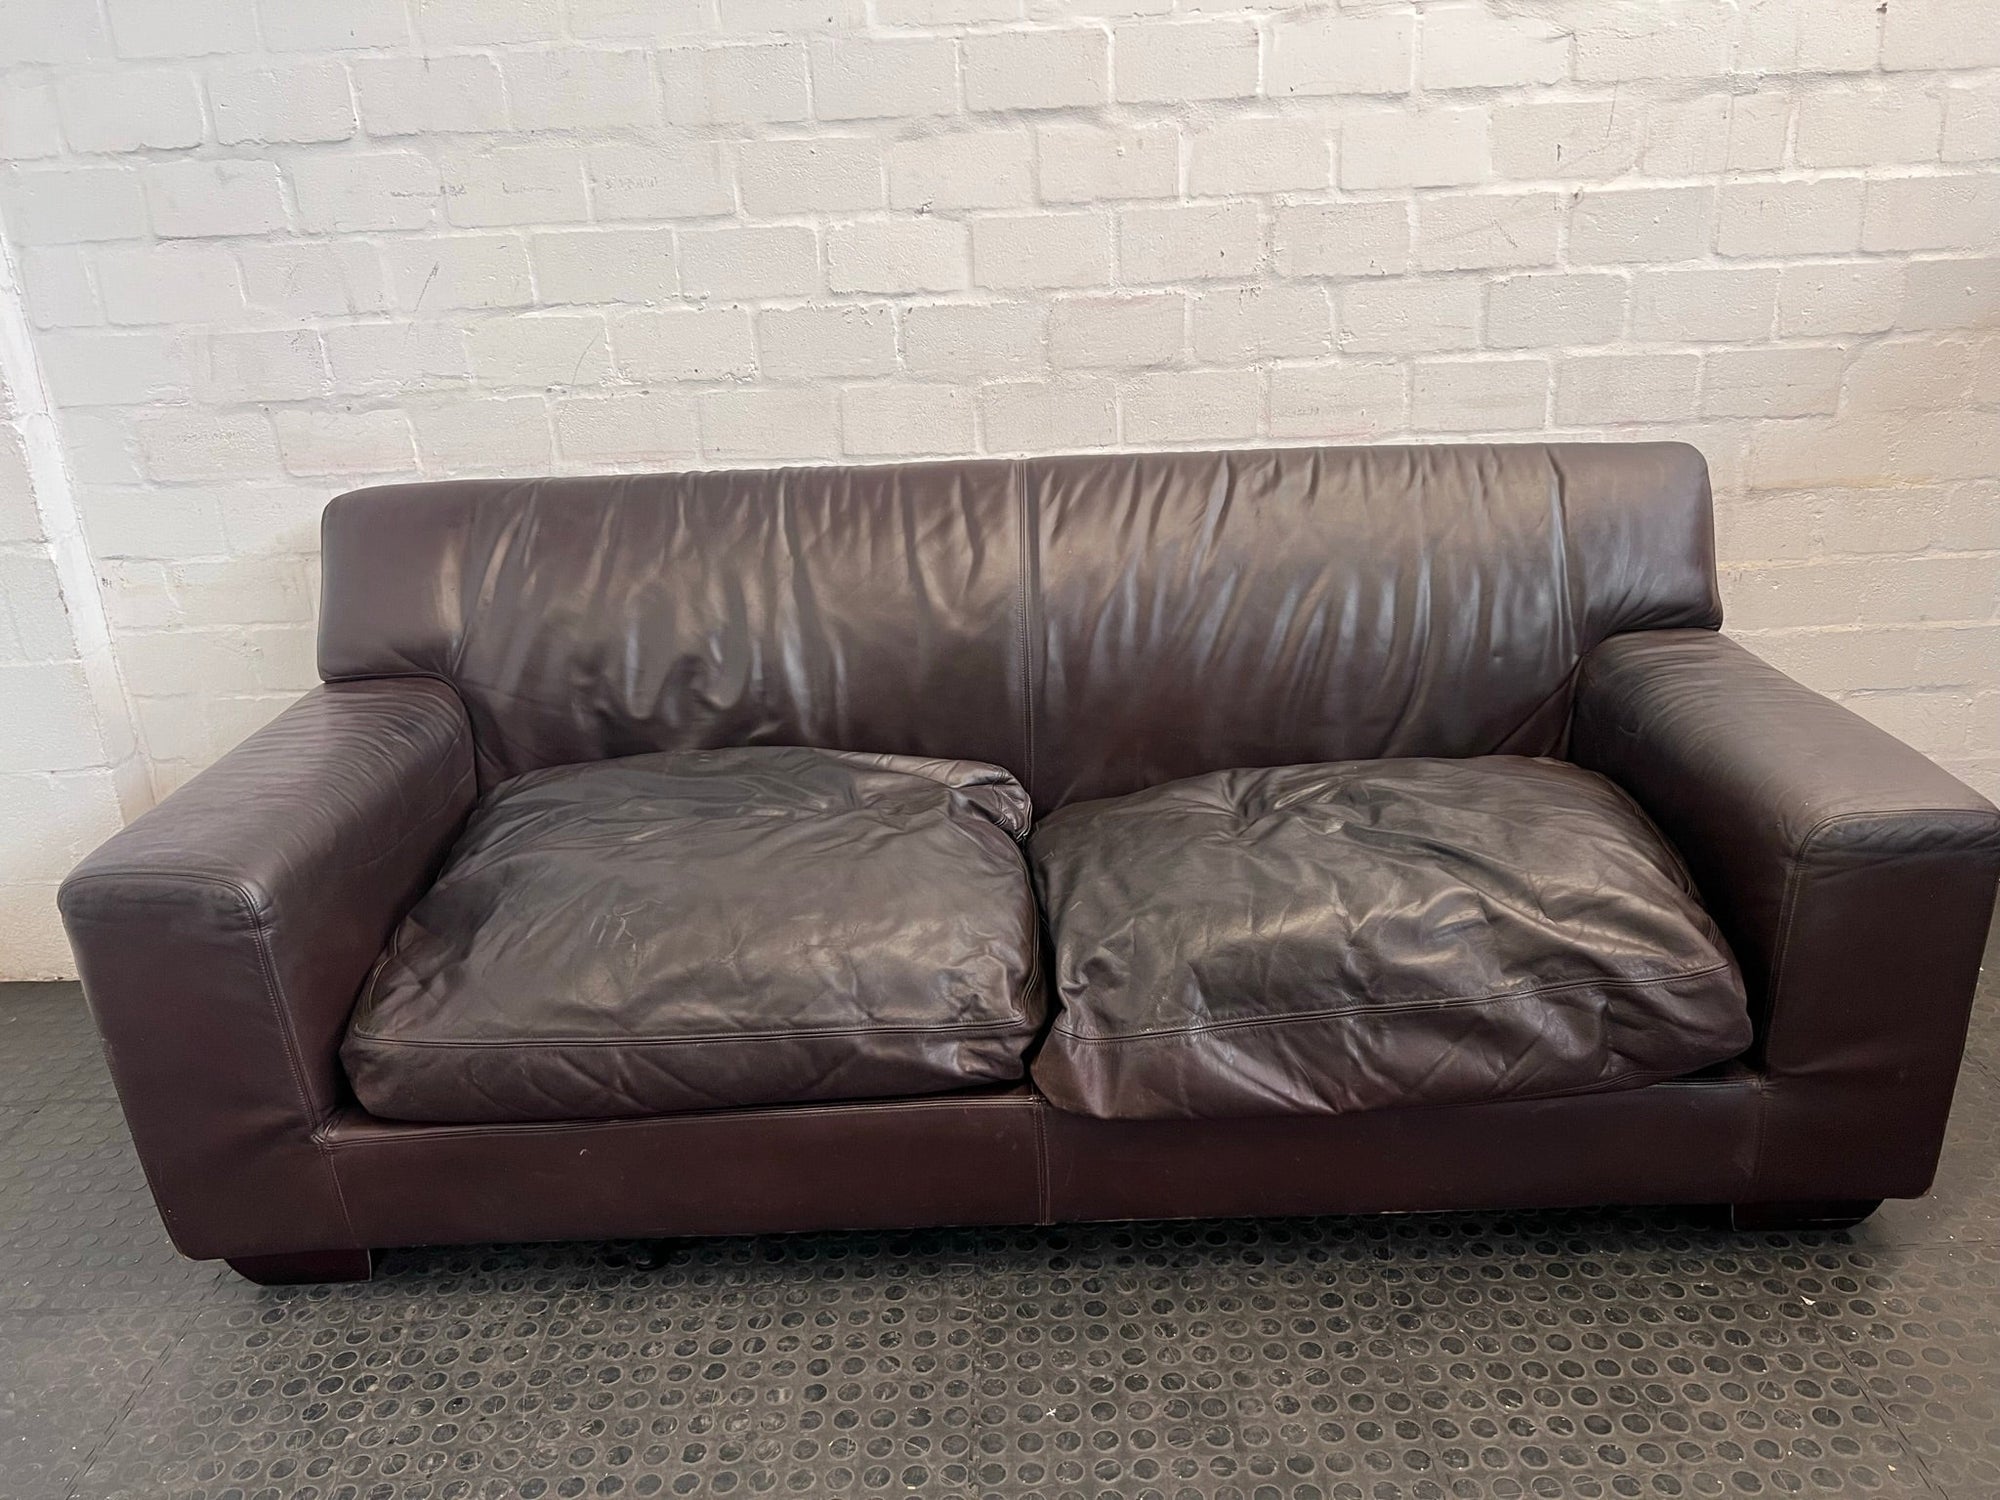 Brown Leather Coricraft 2 Seater Couch - REDUCED